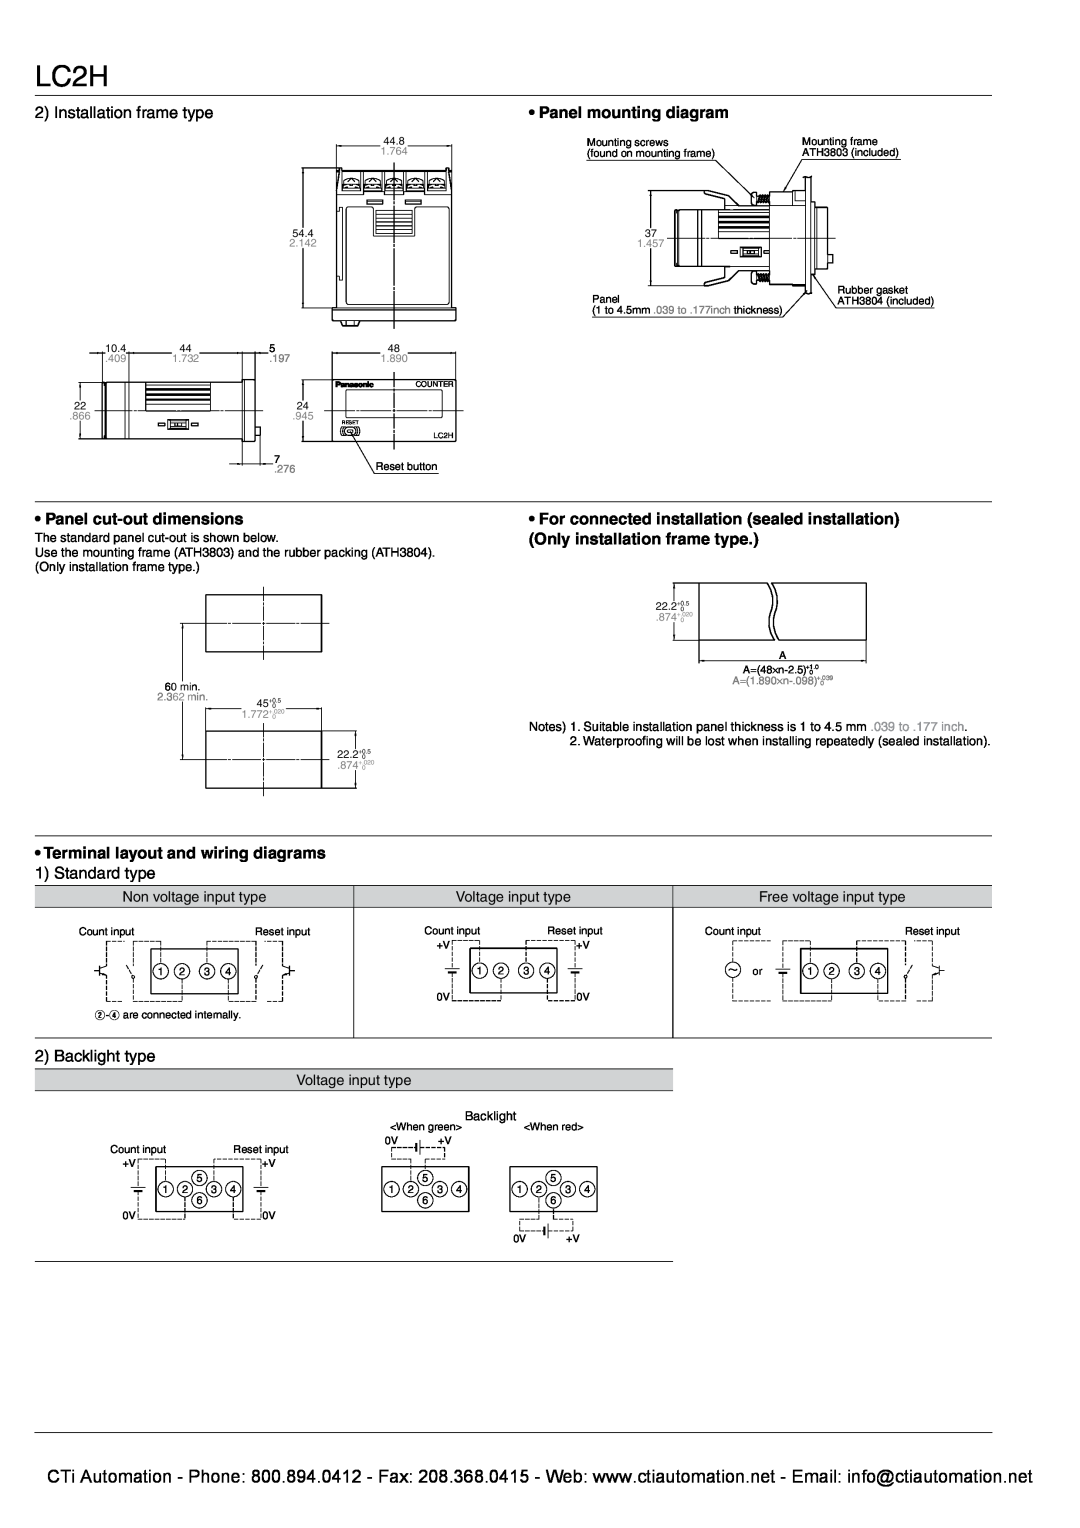 Panasonic LC2H Panel mounting diagram, Panel cut-out dimensions, Terminal layout and wiring diagrams 1 Standard type 